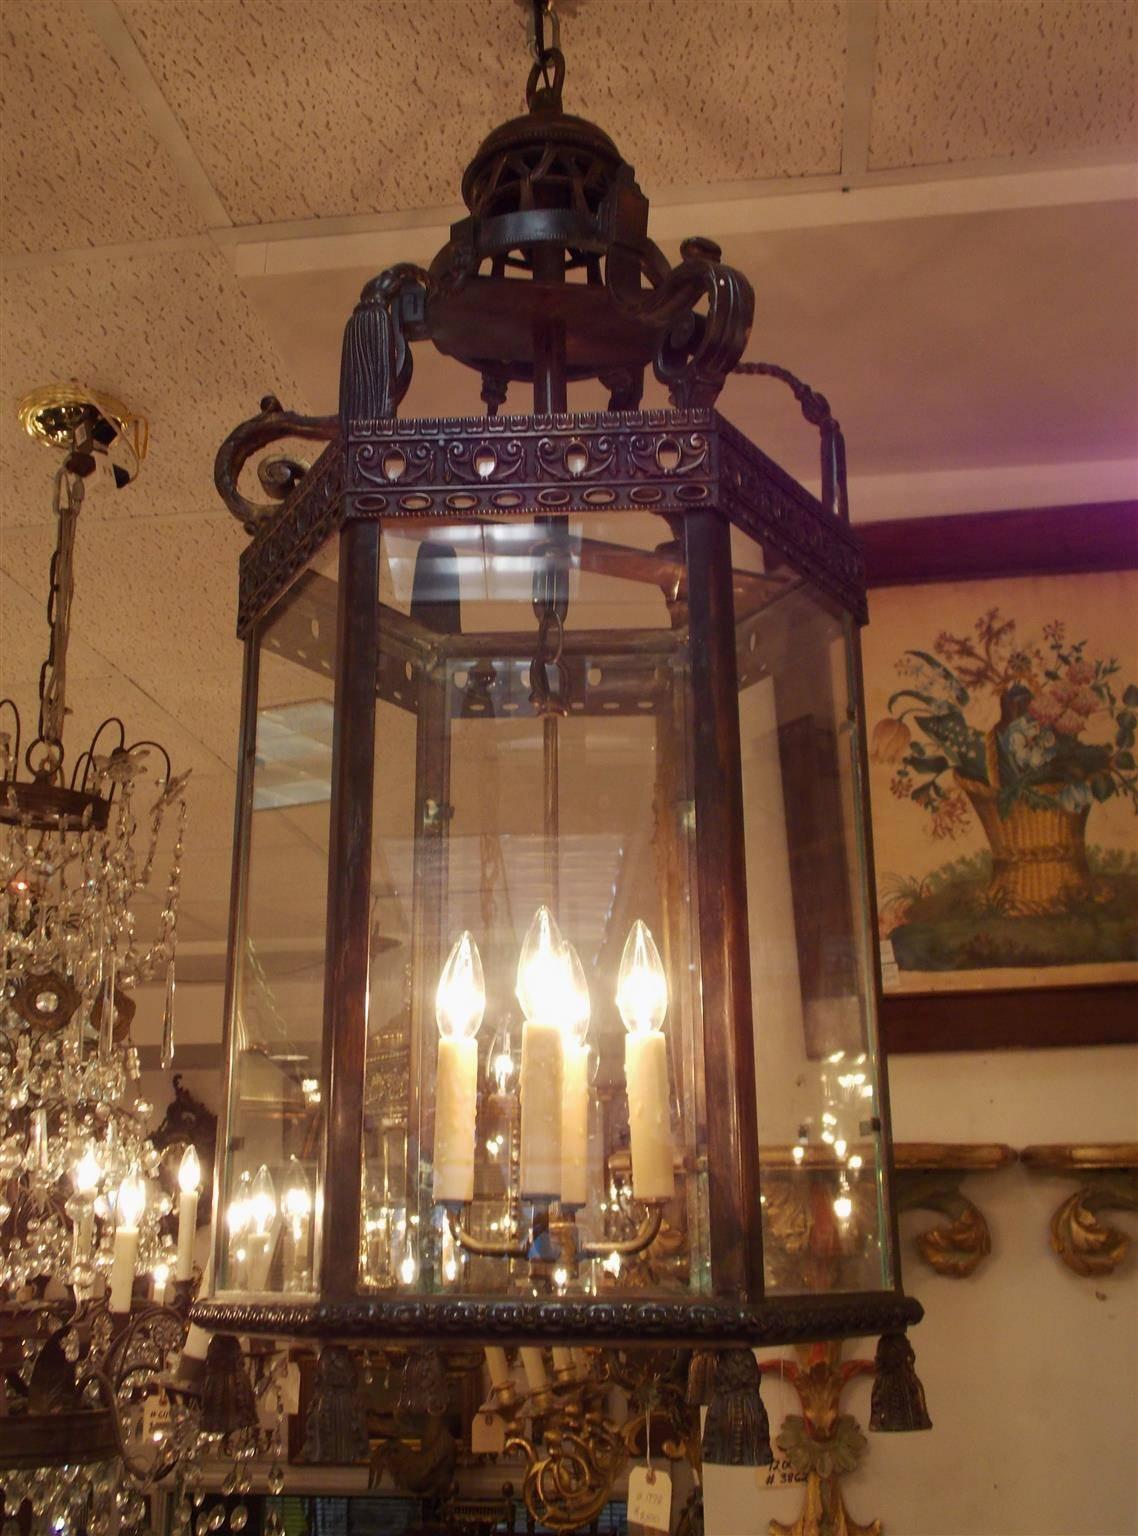 Italian bronze hexagon glass hanging hall lantern with decorative scrolled arms, filigree upper border, four interior light cluster, and terminating with six lower decorative tassels, Early 19th century. Lantern was originally candle powered and has